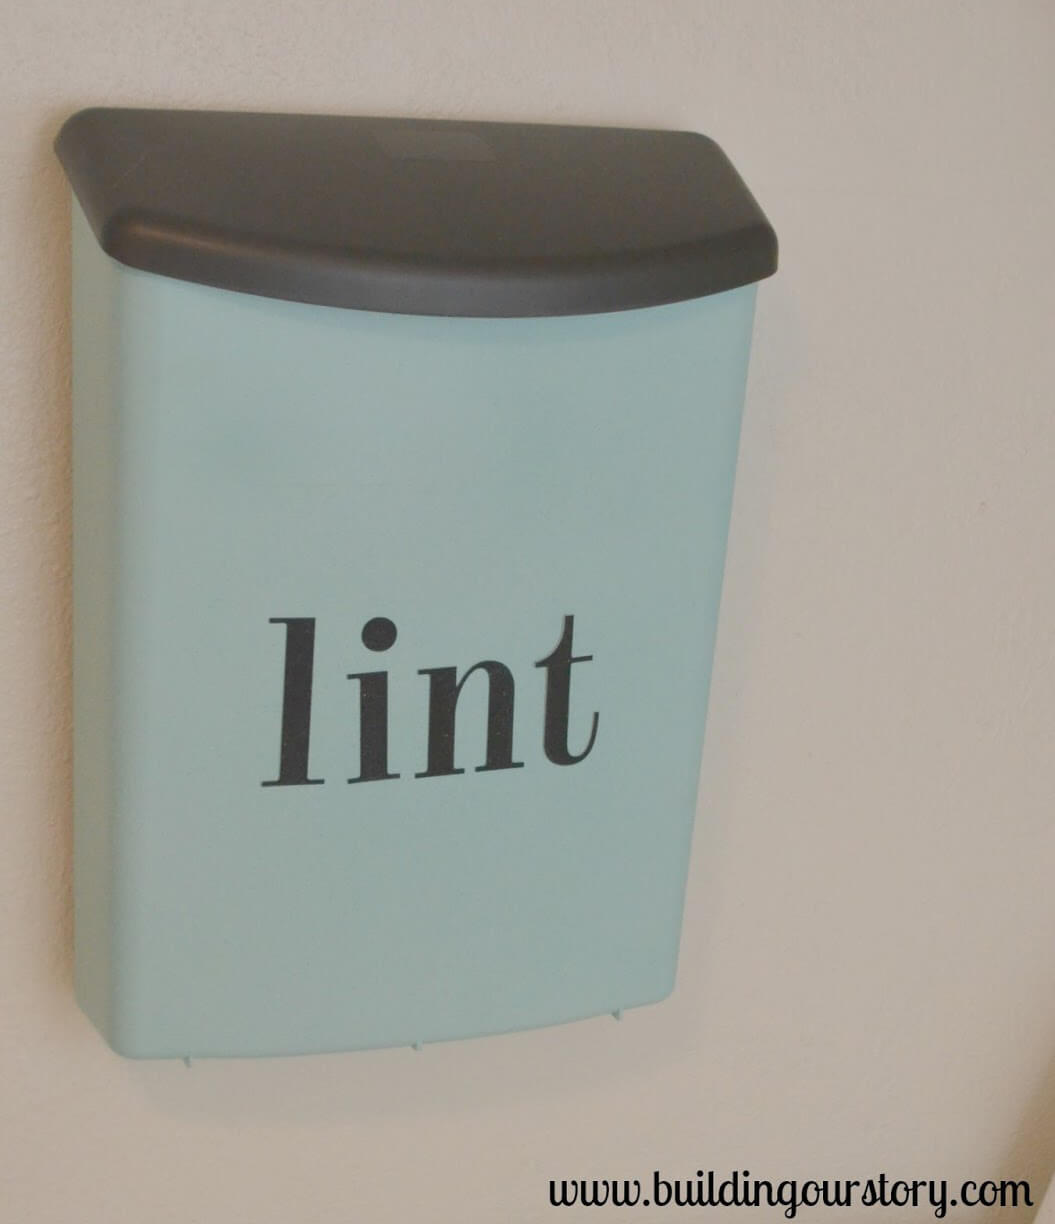 Wall-Mounted Dryer Lint Disposal Container